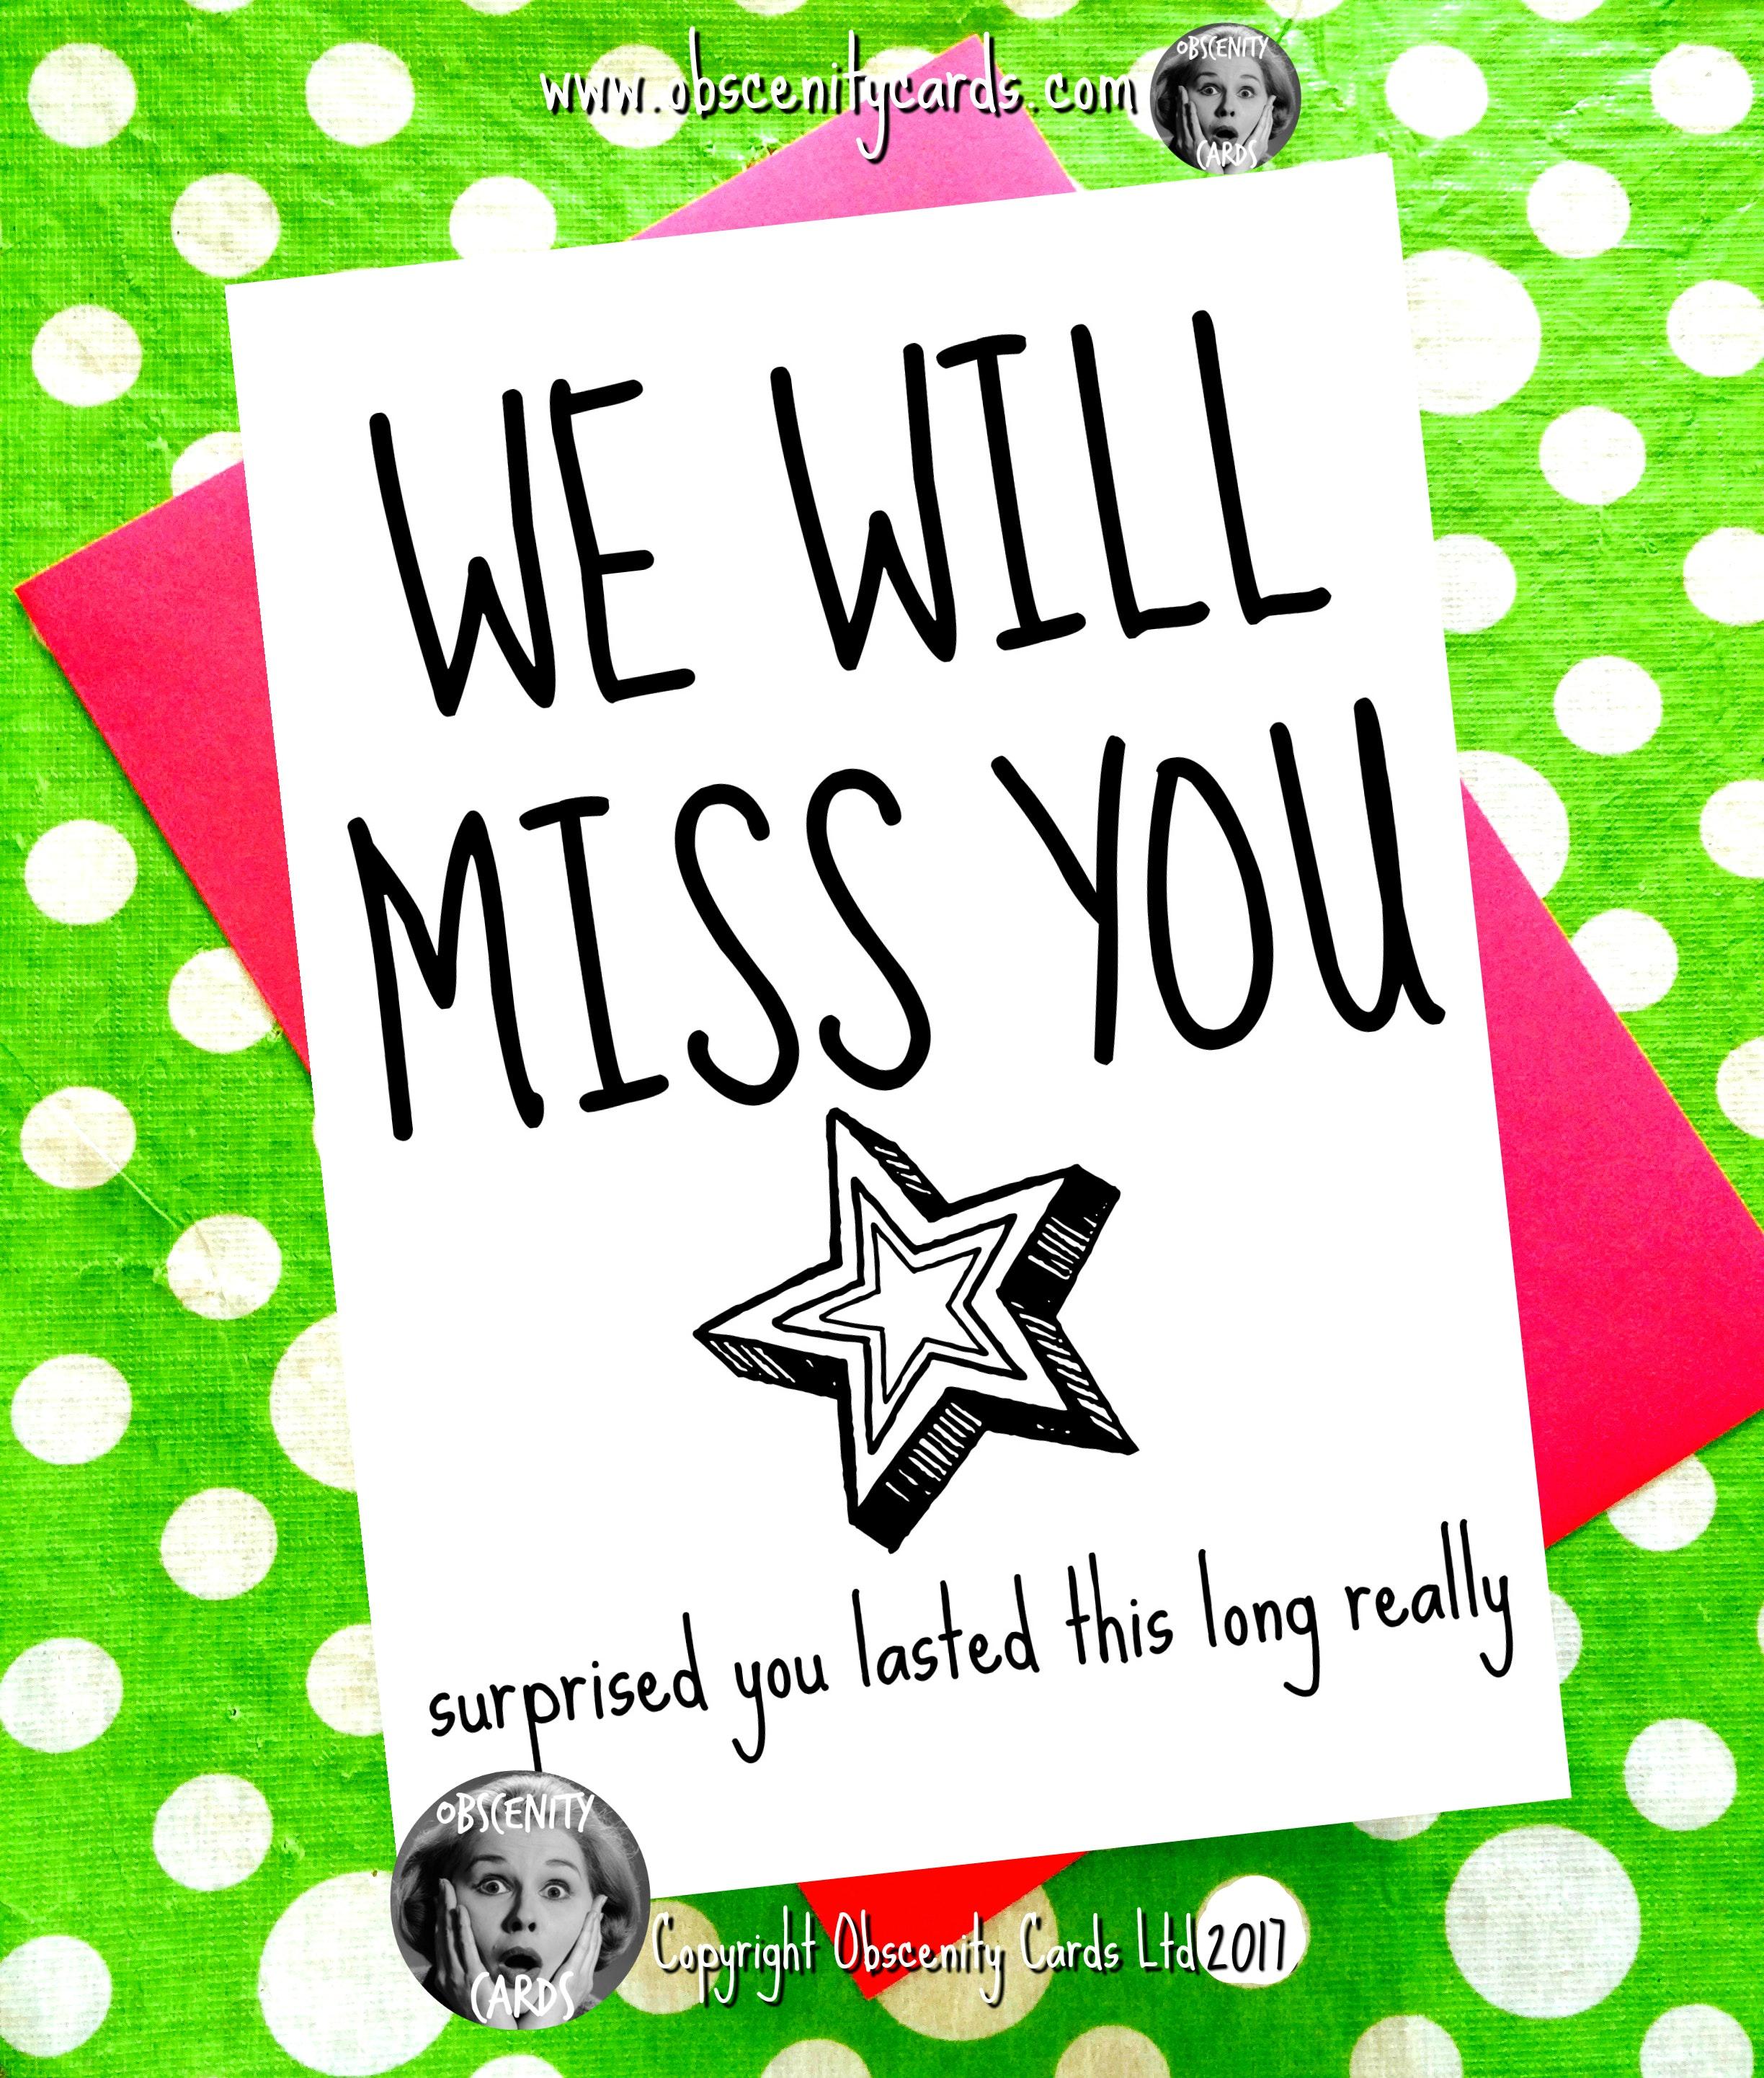 we-will-miss-you-card-template-free-printable-templates